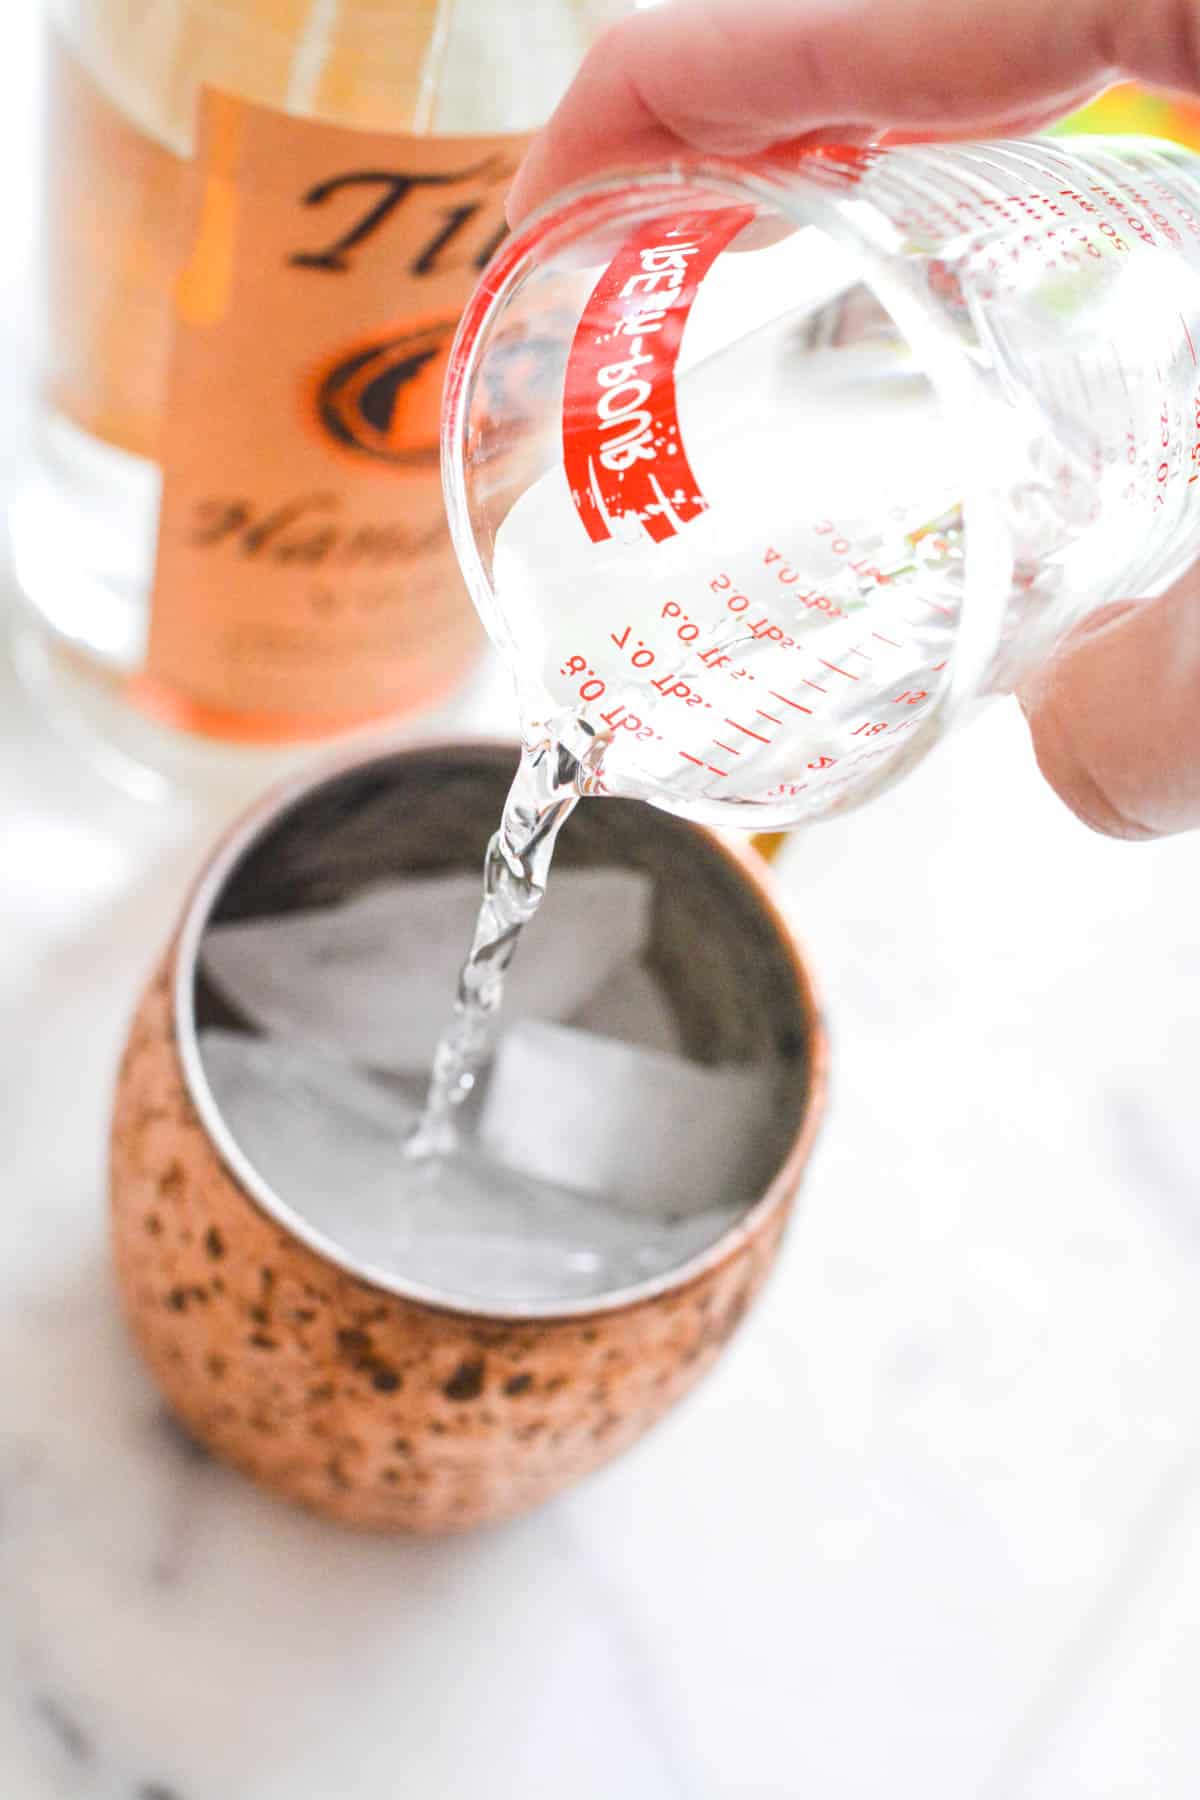 Close up of vodka being added to a Moscow mule mug.